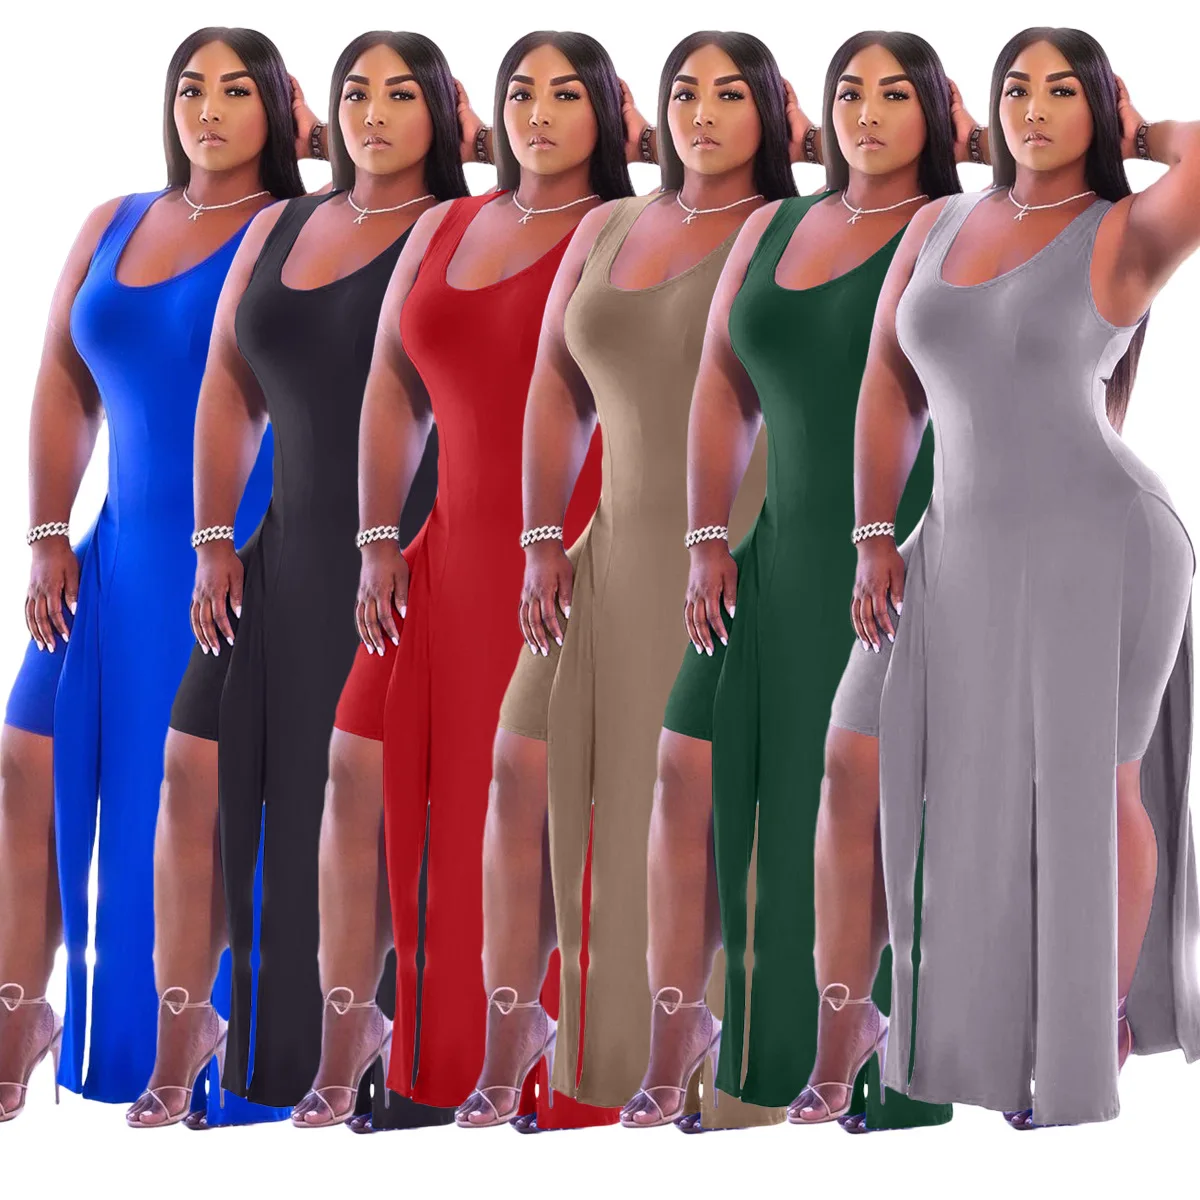 

Women Summer Woman Sleeveless Custom Booty Slit 2 Piece Tank Top And Shorts Sets Two Pieces Short Pants Set Outfits 2021 -YS, Gray,army green,khaki,red,royal blue,black